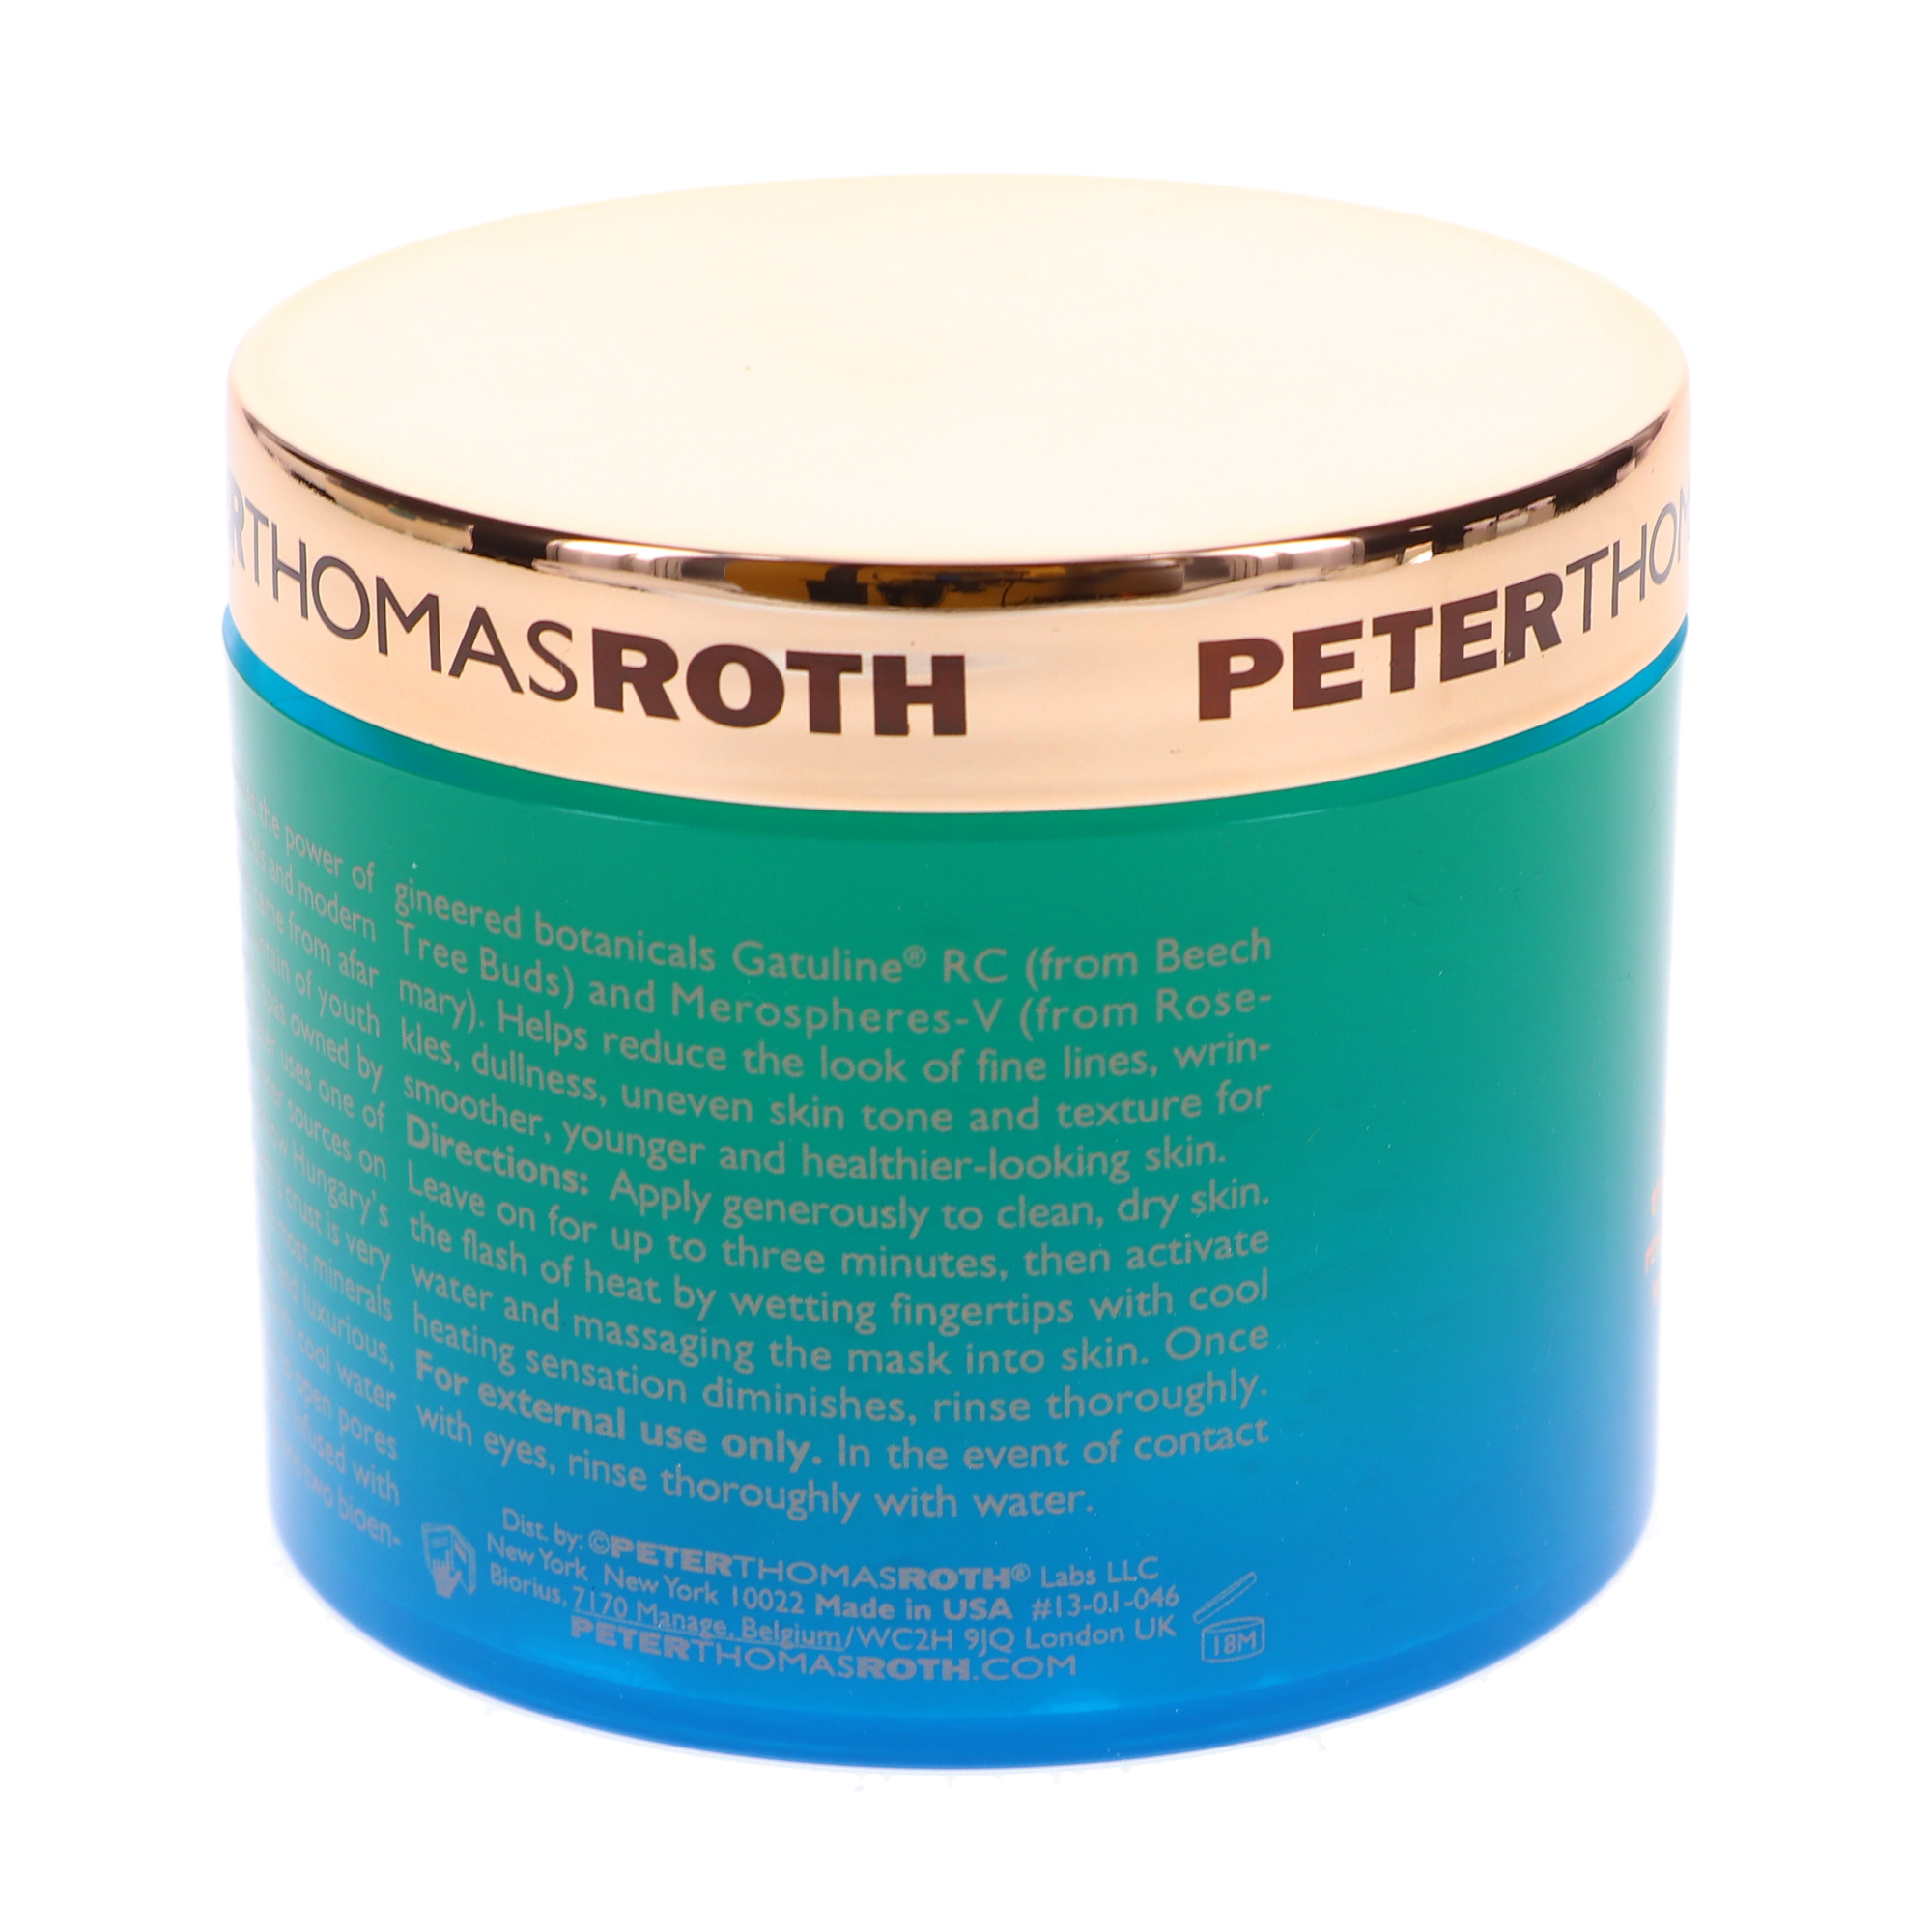 Peter Thomas Roth Hungarian Thermal Water Mineral Rich Atomic Heat Mask 5.1 oz - image 5 of 8